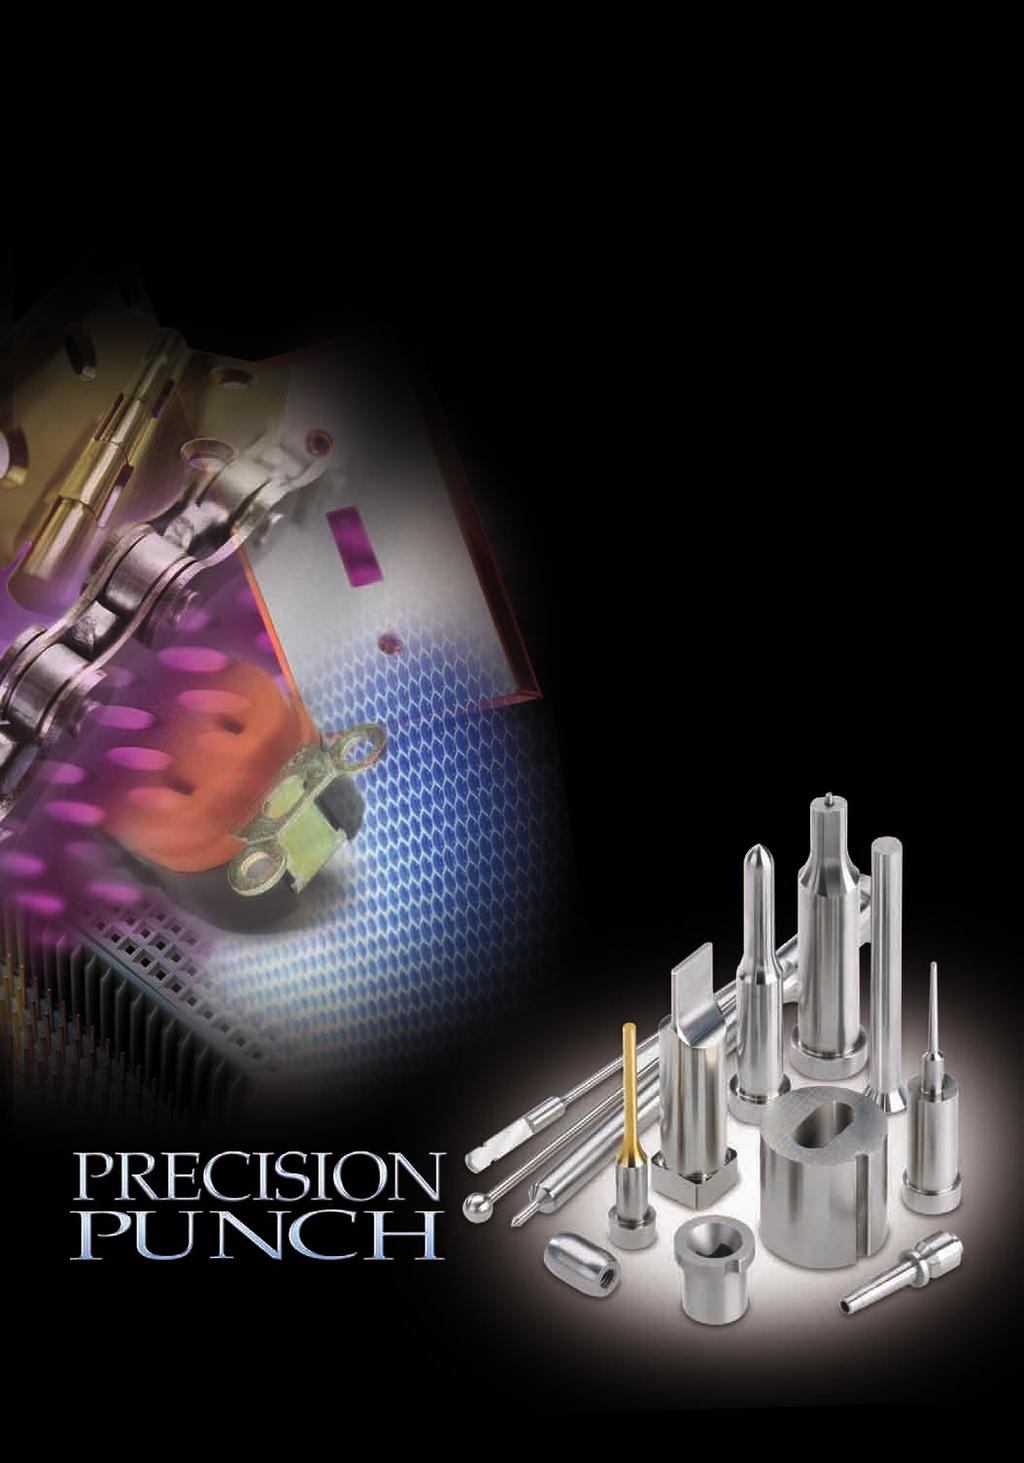 P R E C I S I O N P R O D U C T S S I N C E 1 9 6 5 The one decision for stamping tool precision. Largest selection of tool steels Tolerances to.00254 mm (.0001 ) Diameters: 0.15 mm (.006 ) to 31.